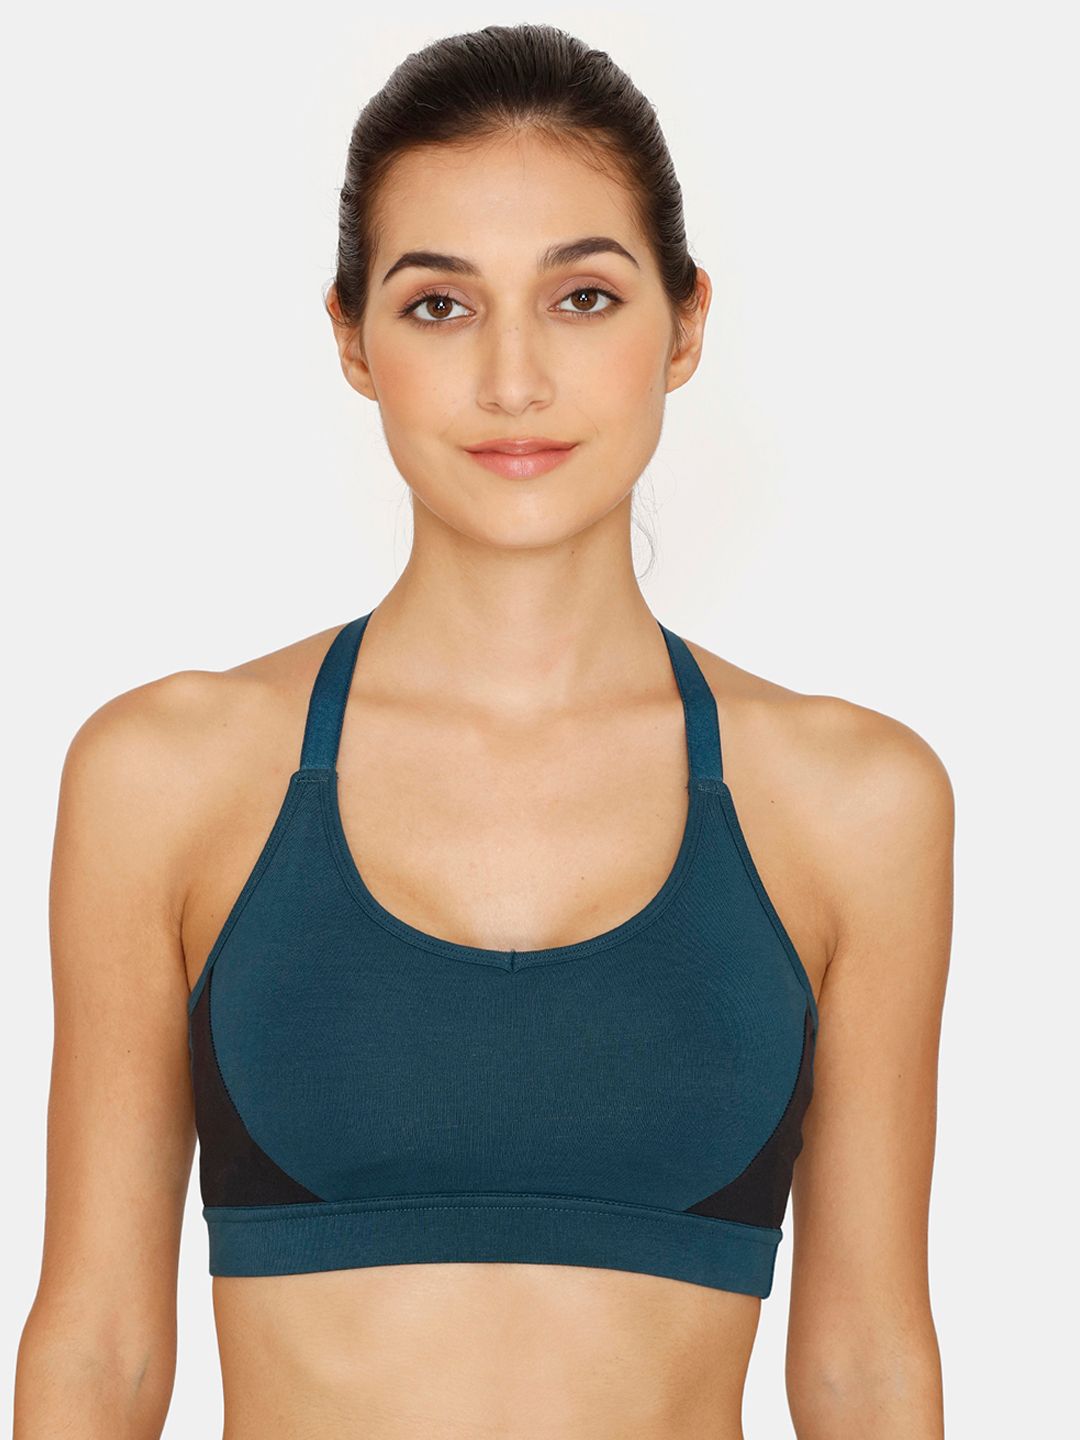 Zelocity by Zivame Teal Blue & Black Colourblocked Bra Price in India